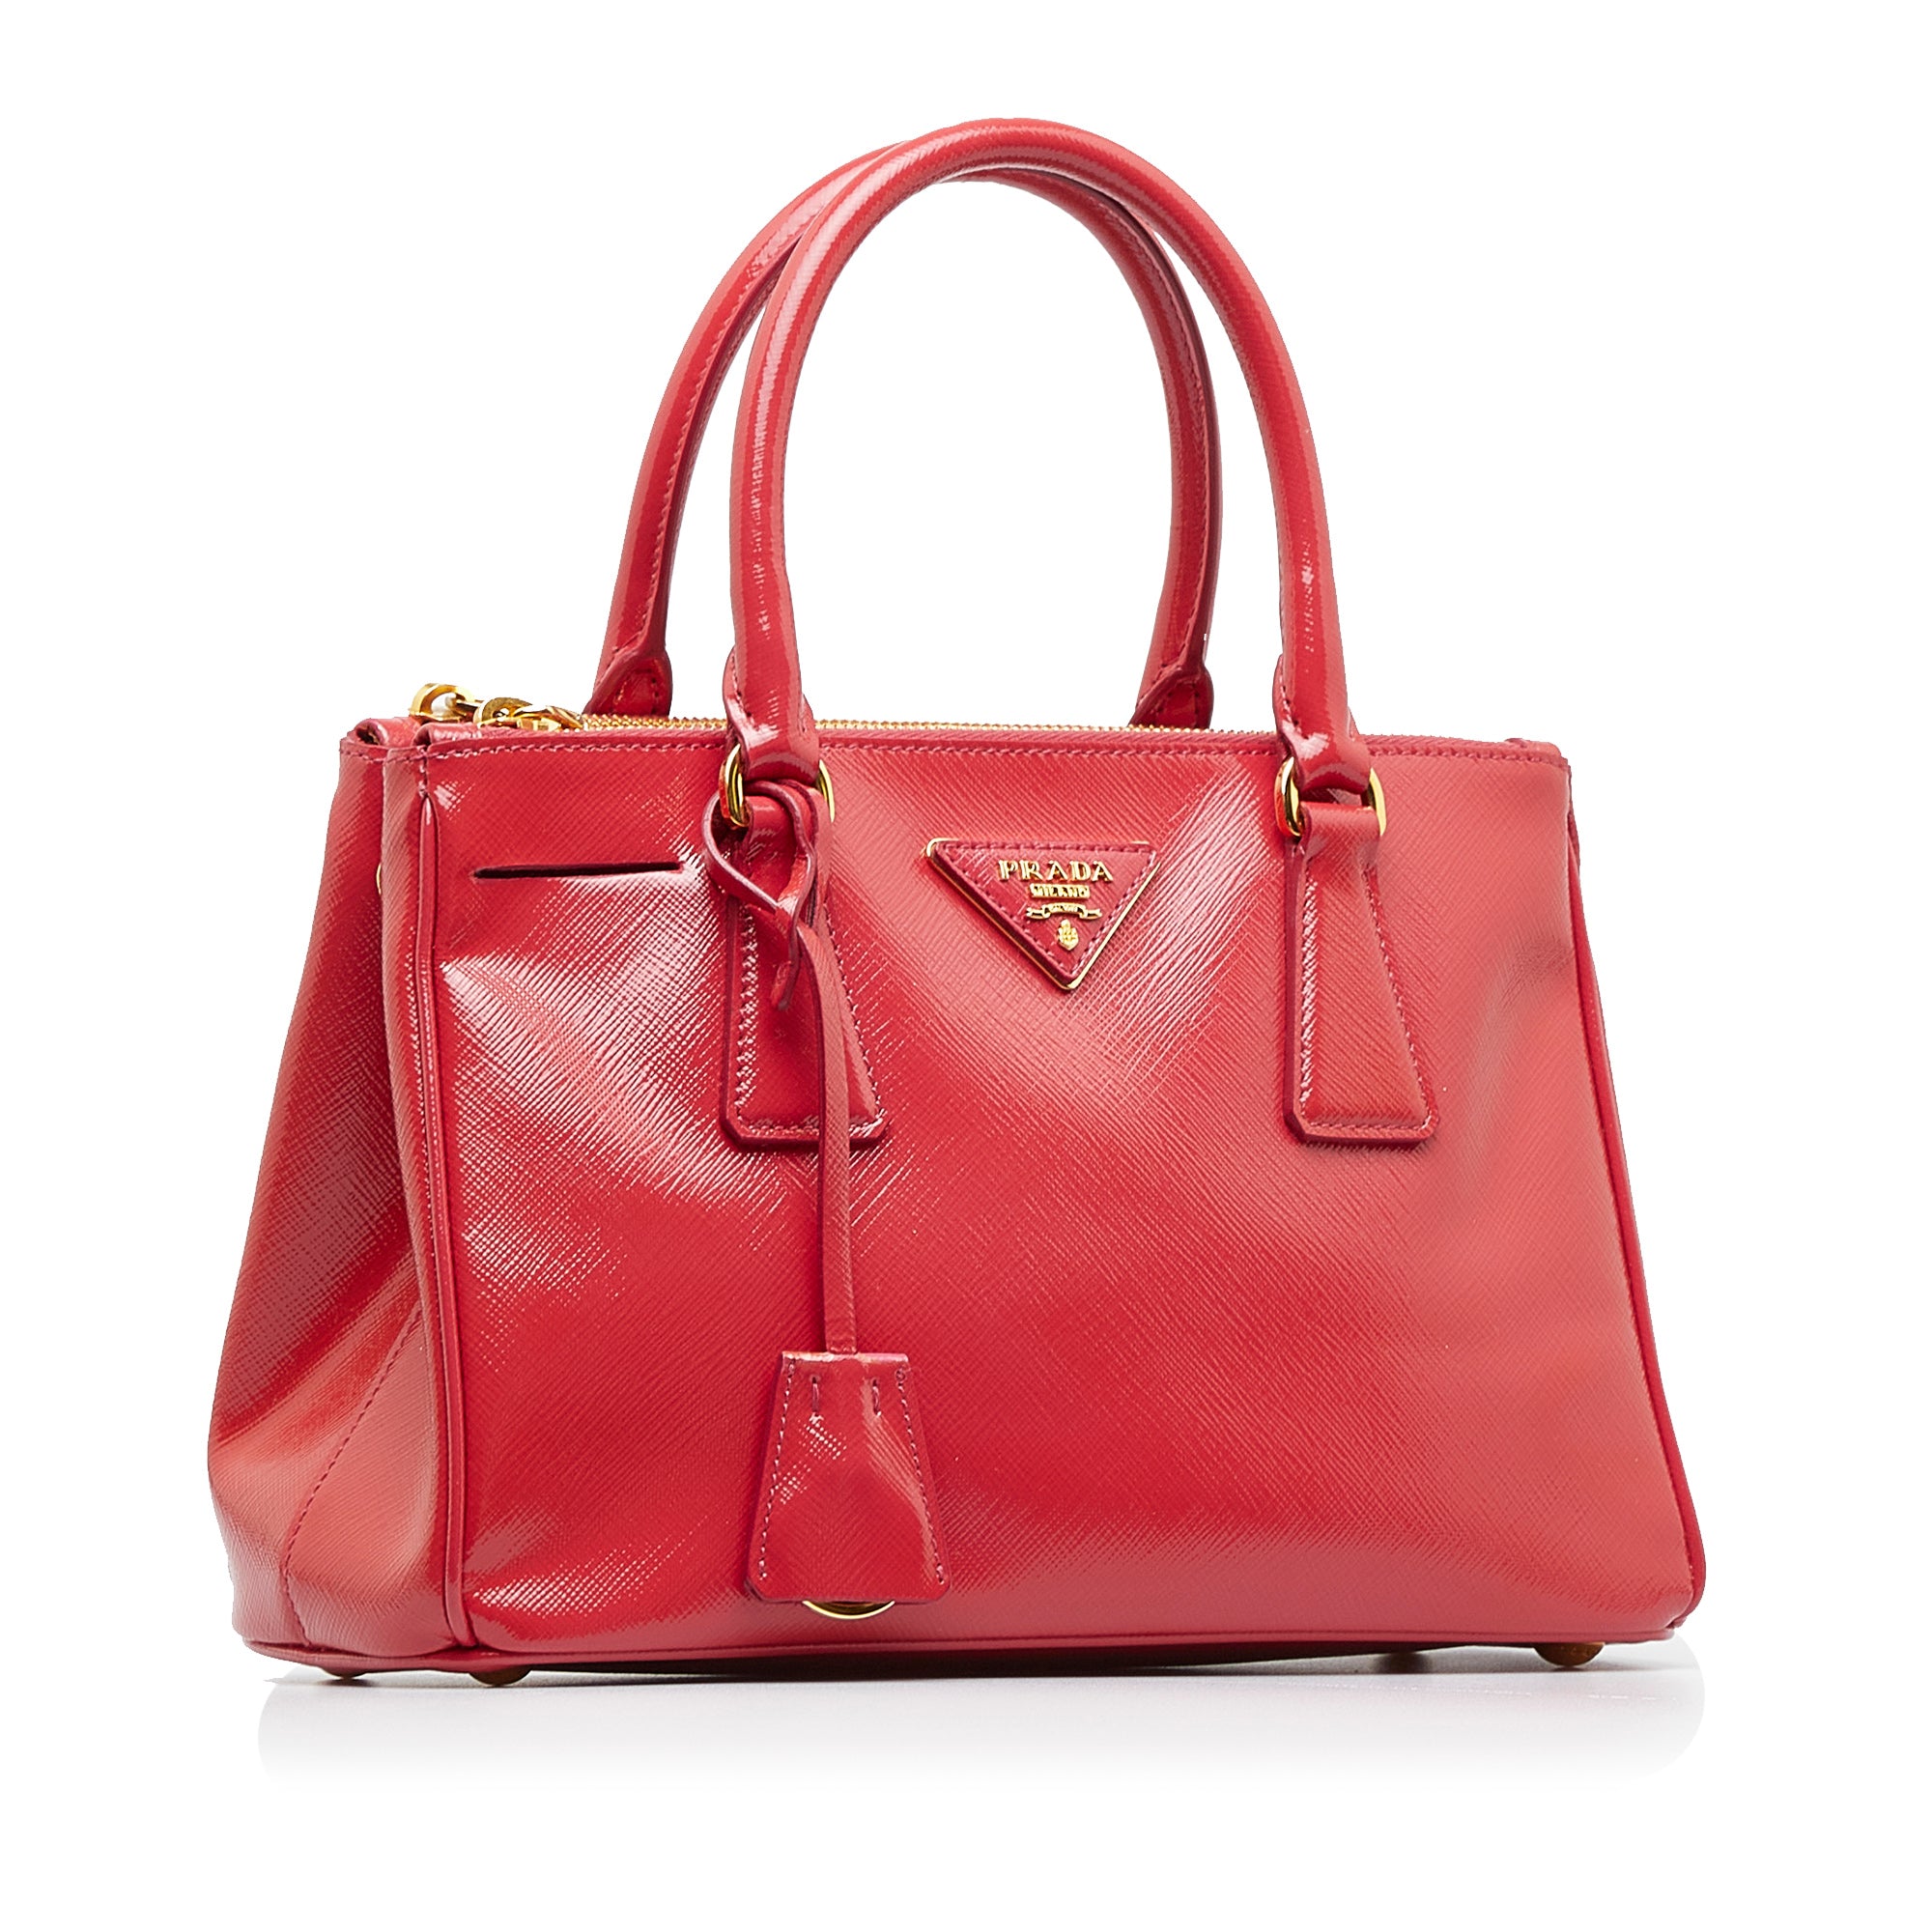 Prada Saffiano Lux Red Large Double Tote Bag